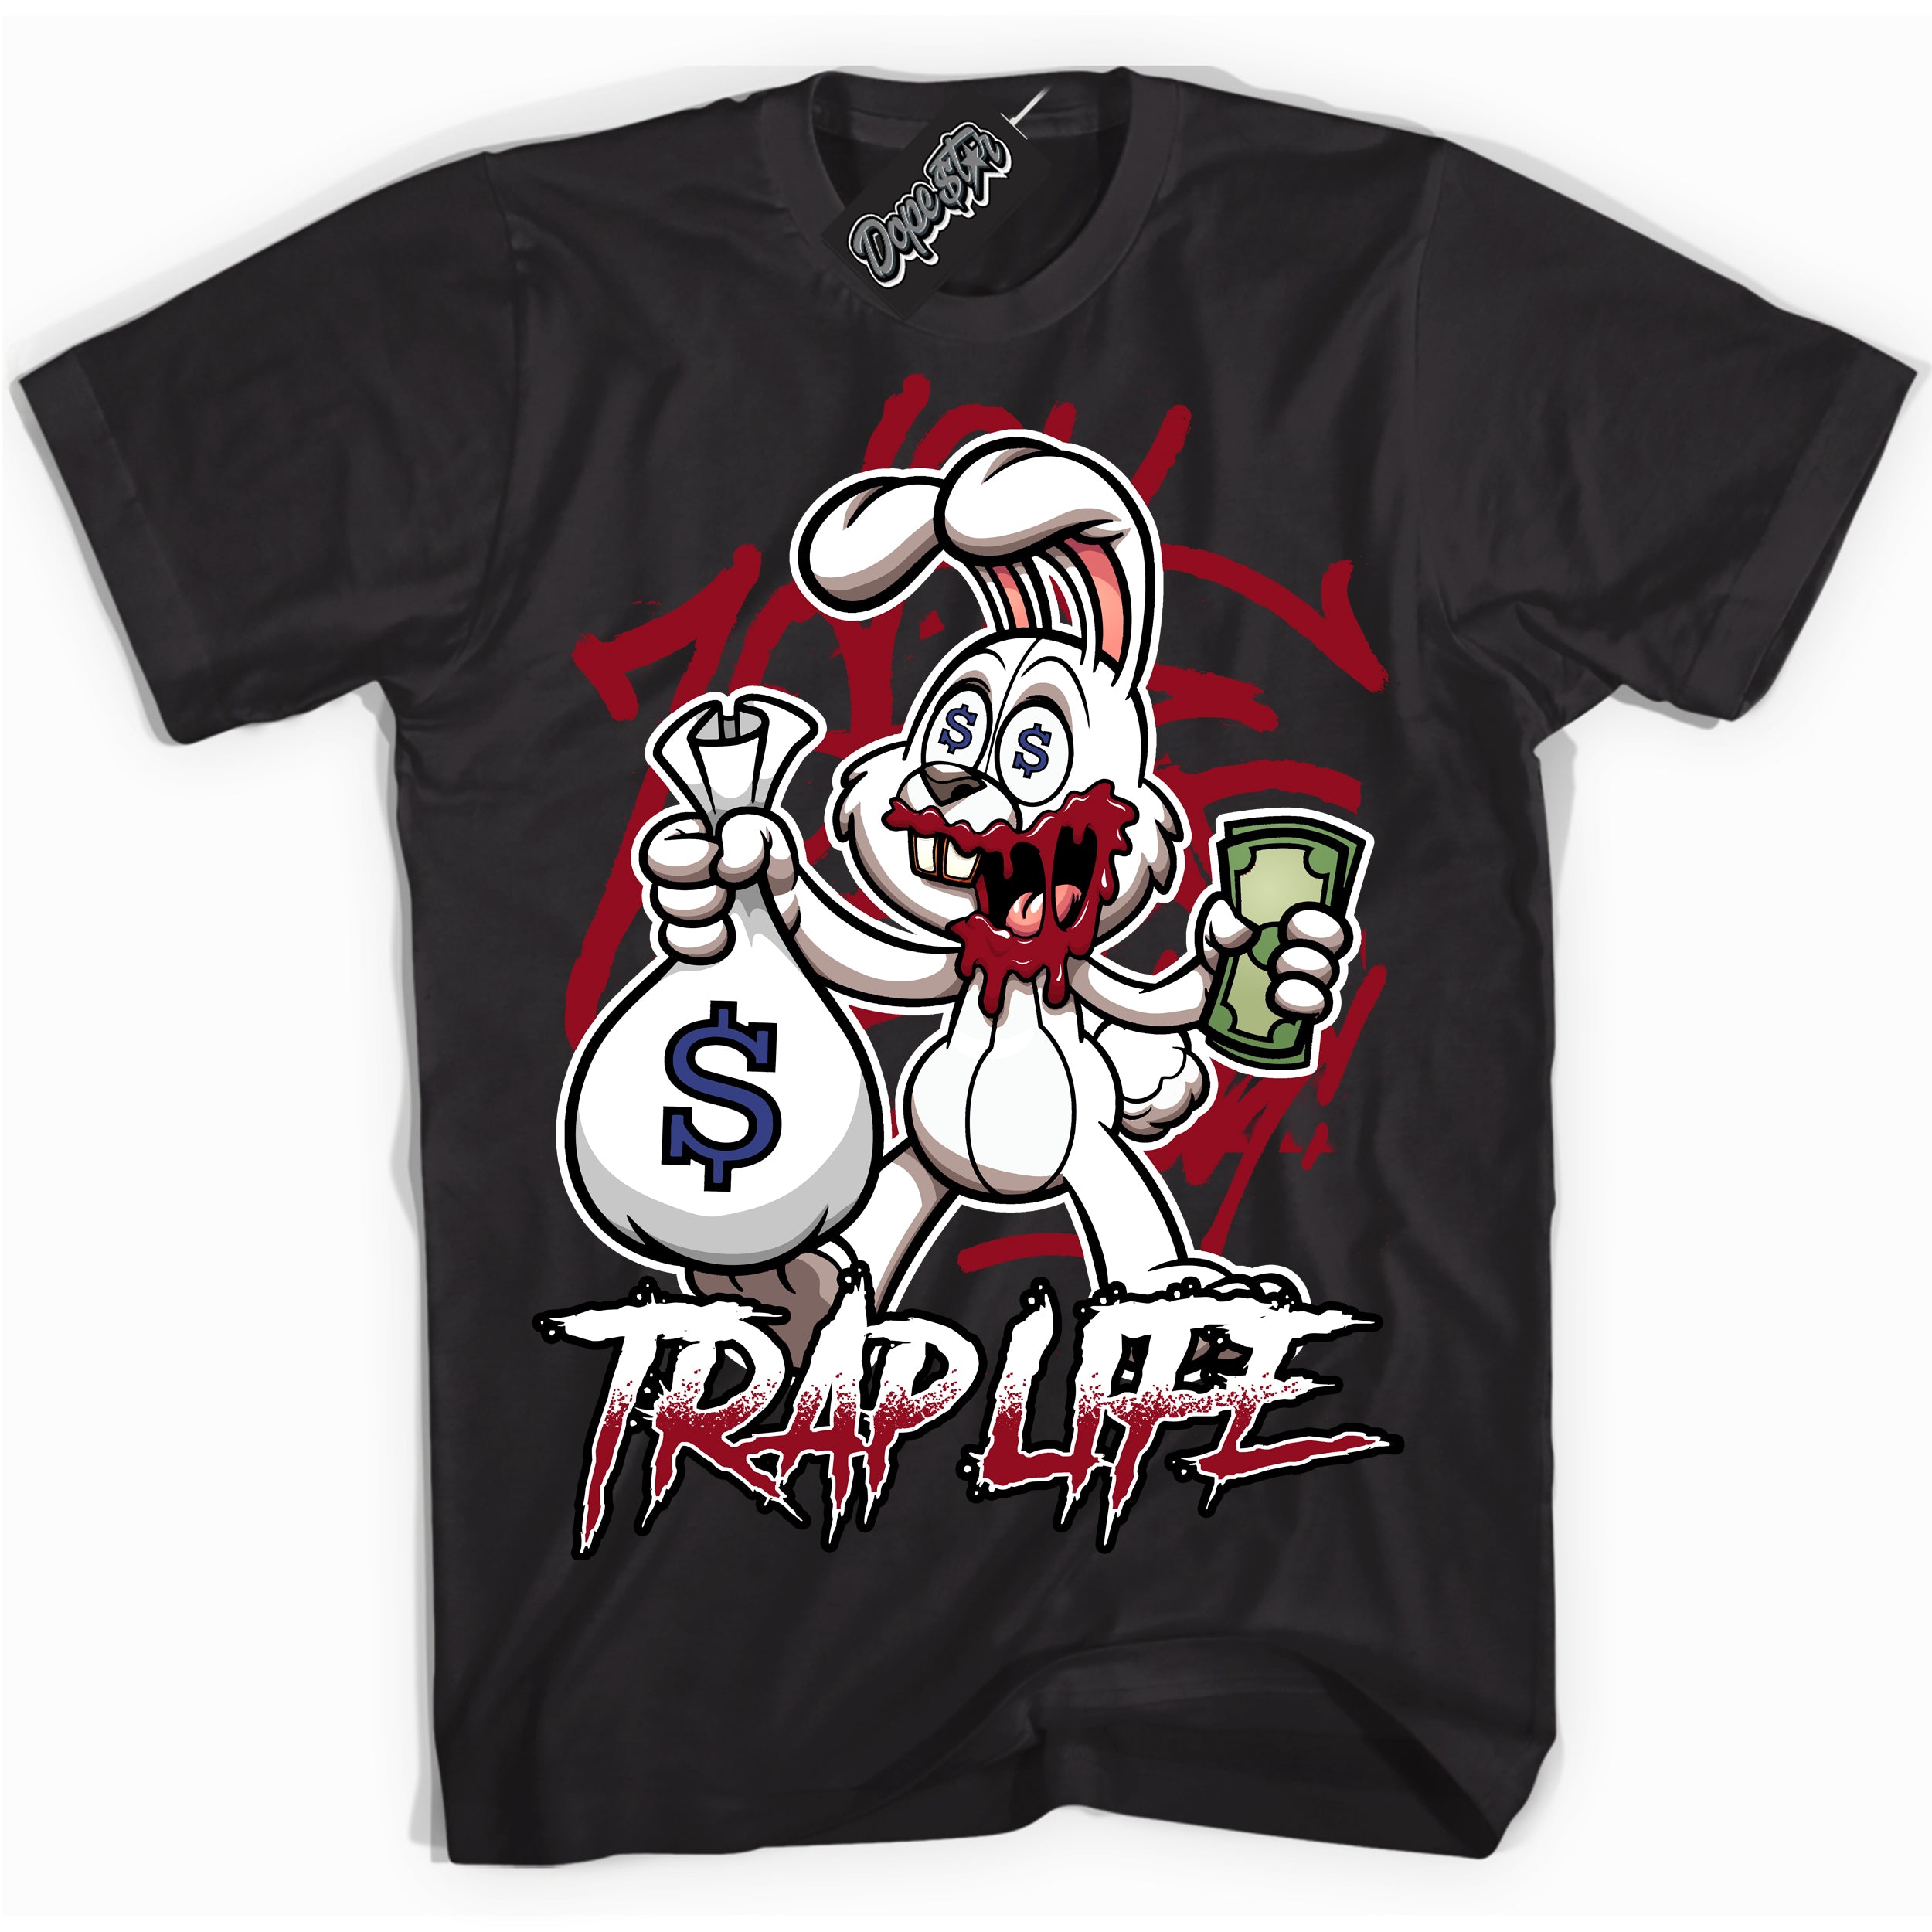 Cool Black Shirt with “ Trap Rabbit ” design that perfectly matches Playoffs 8s Sneakers.